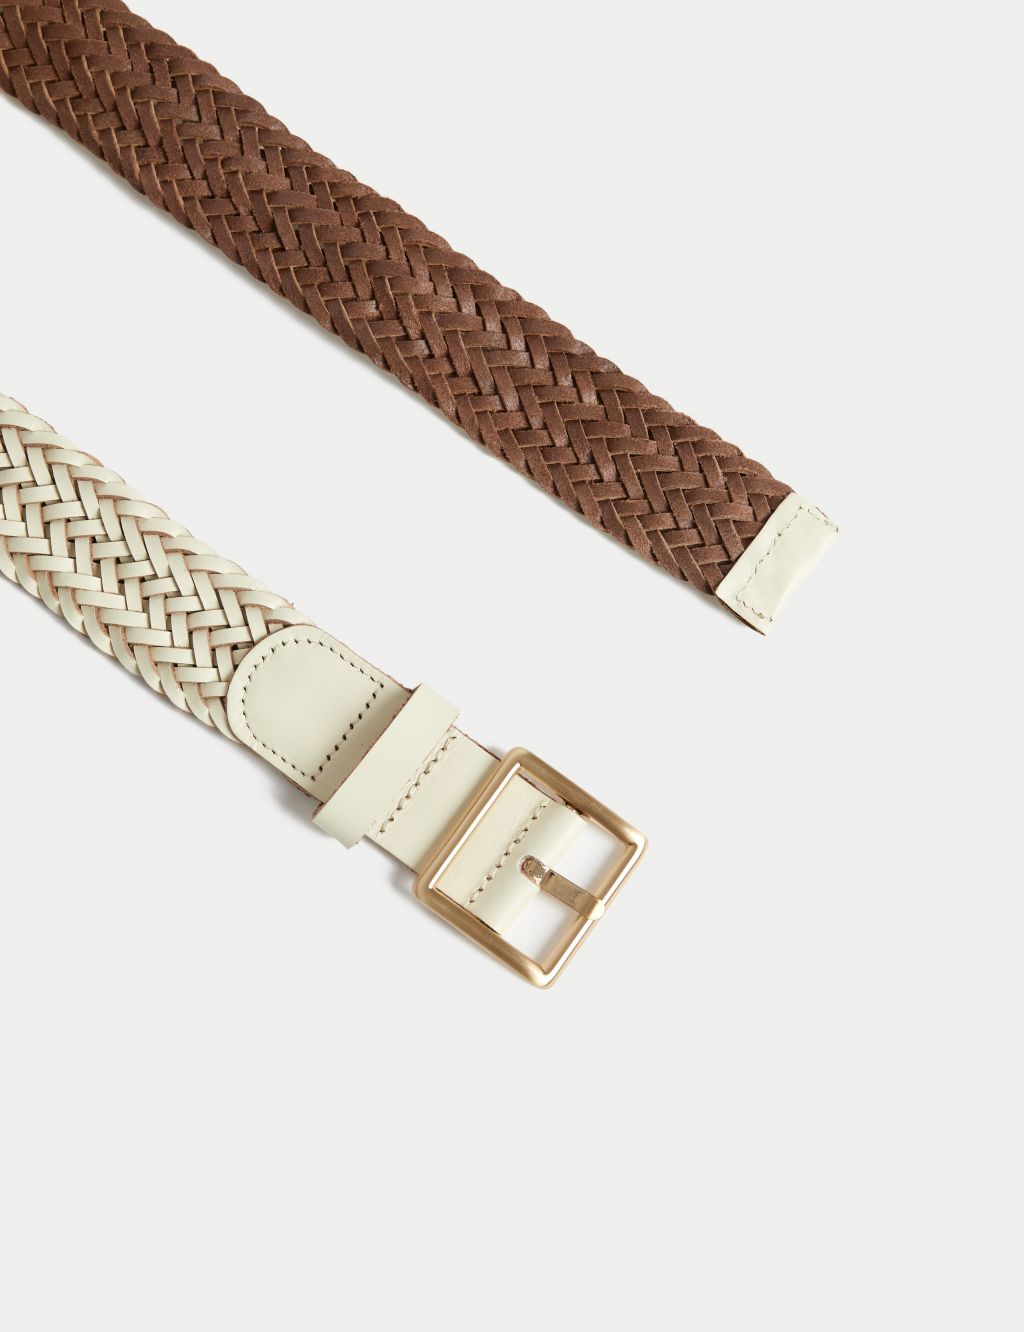 Leather Woven Jeans Belt image 2